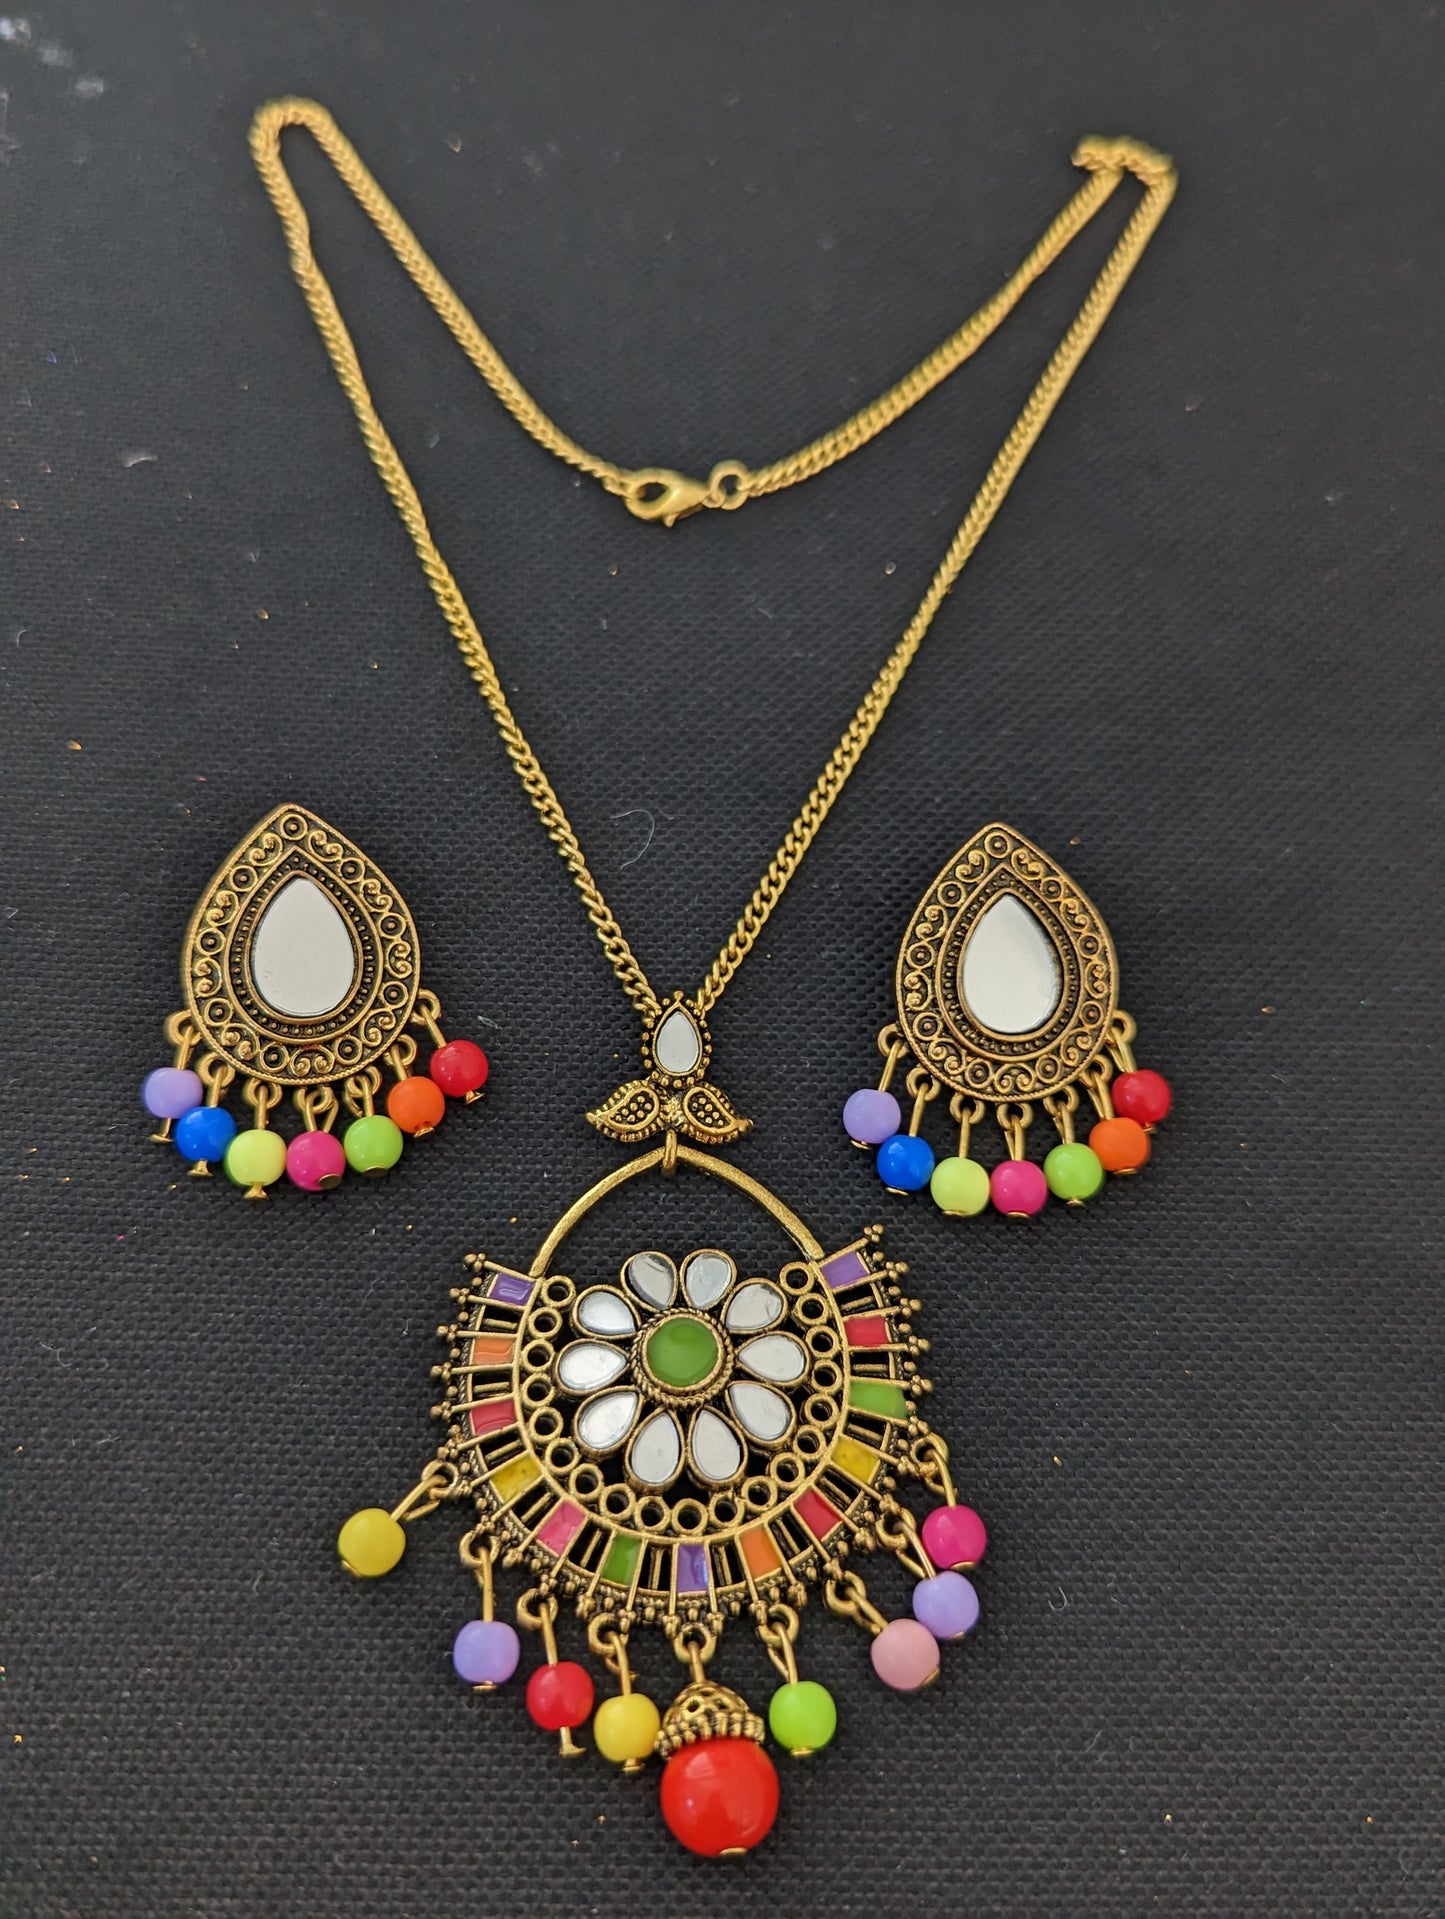 Antique gold mirror pendant chain necklace and earring set - Design 5